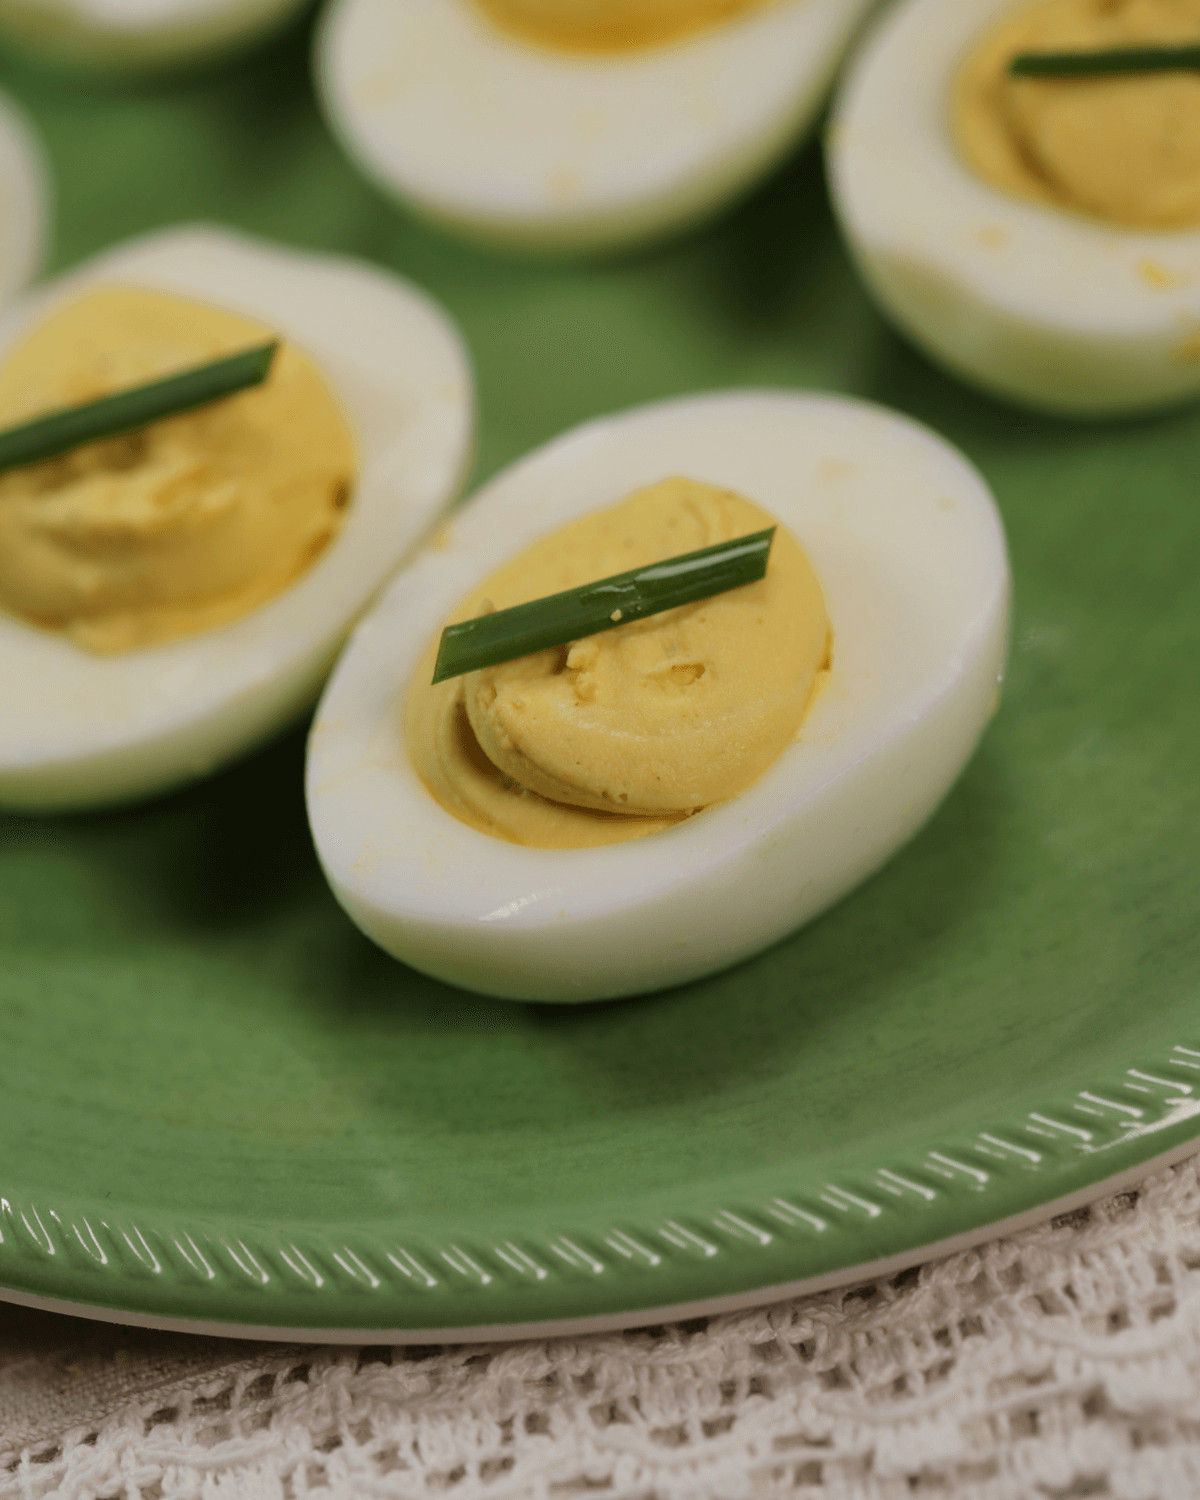 Deviled eggs without mustard, garnished with chives, served on a green plate.